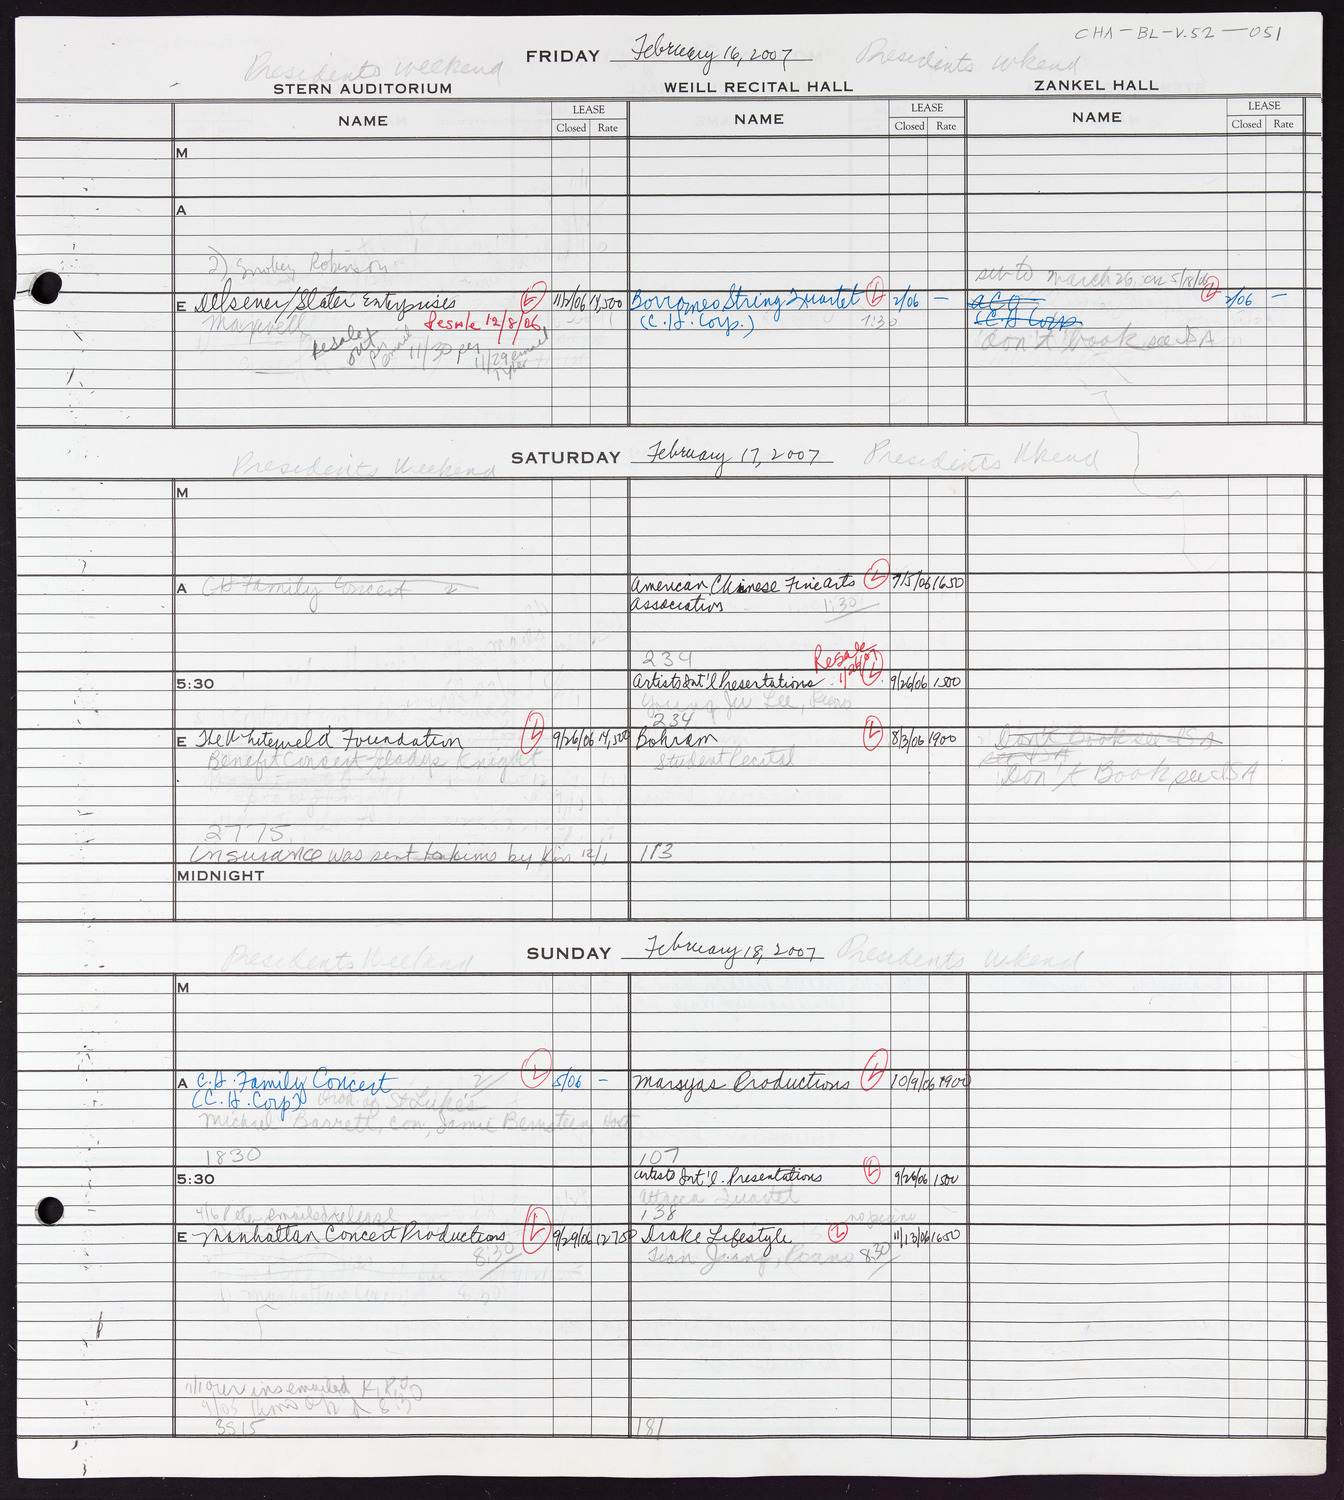 Carnegie Hall Booking Ledger, volume 52, page 51